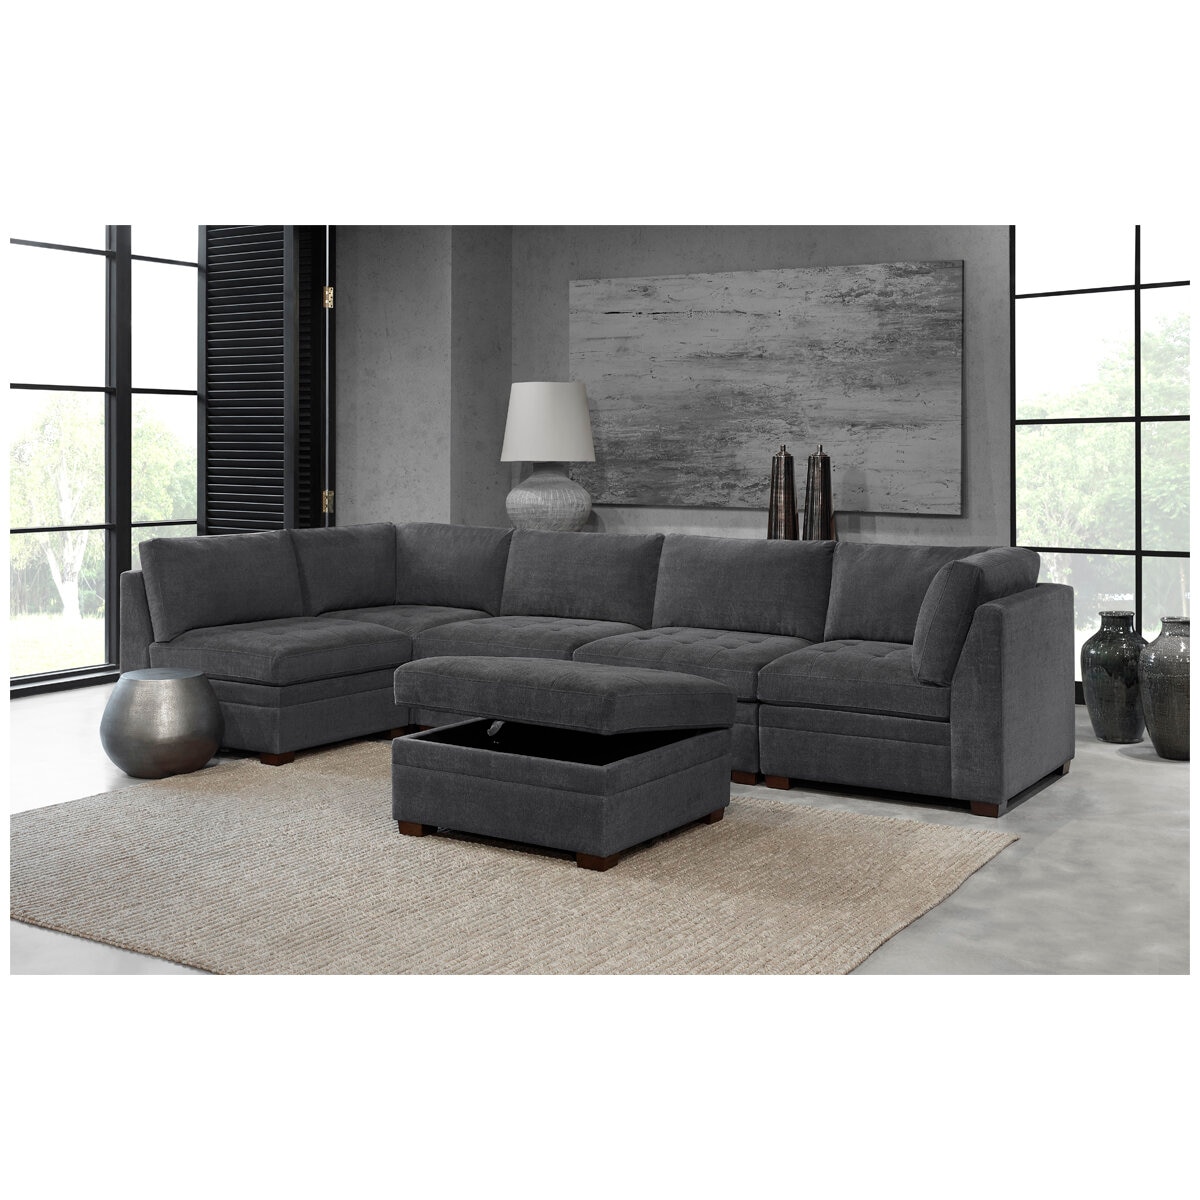 Thomasville Tisdale 6-piece Modular Sectional